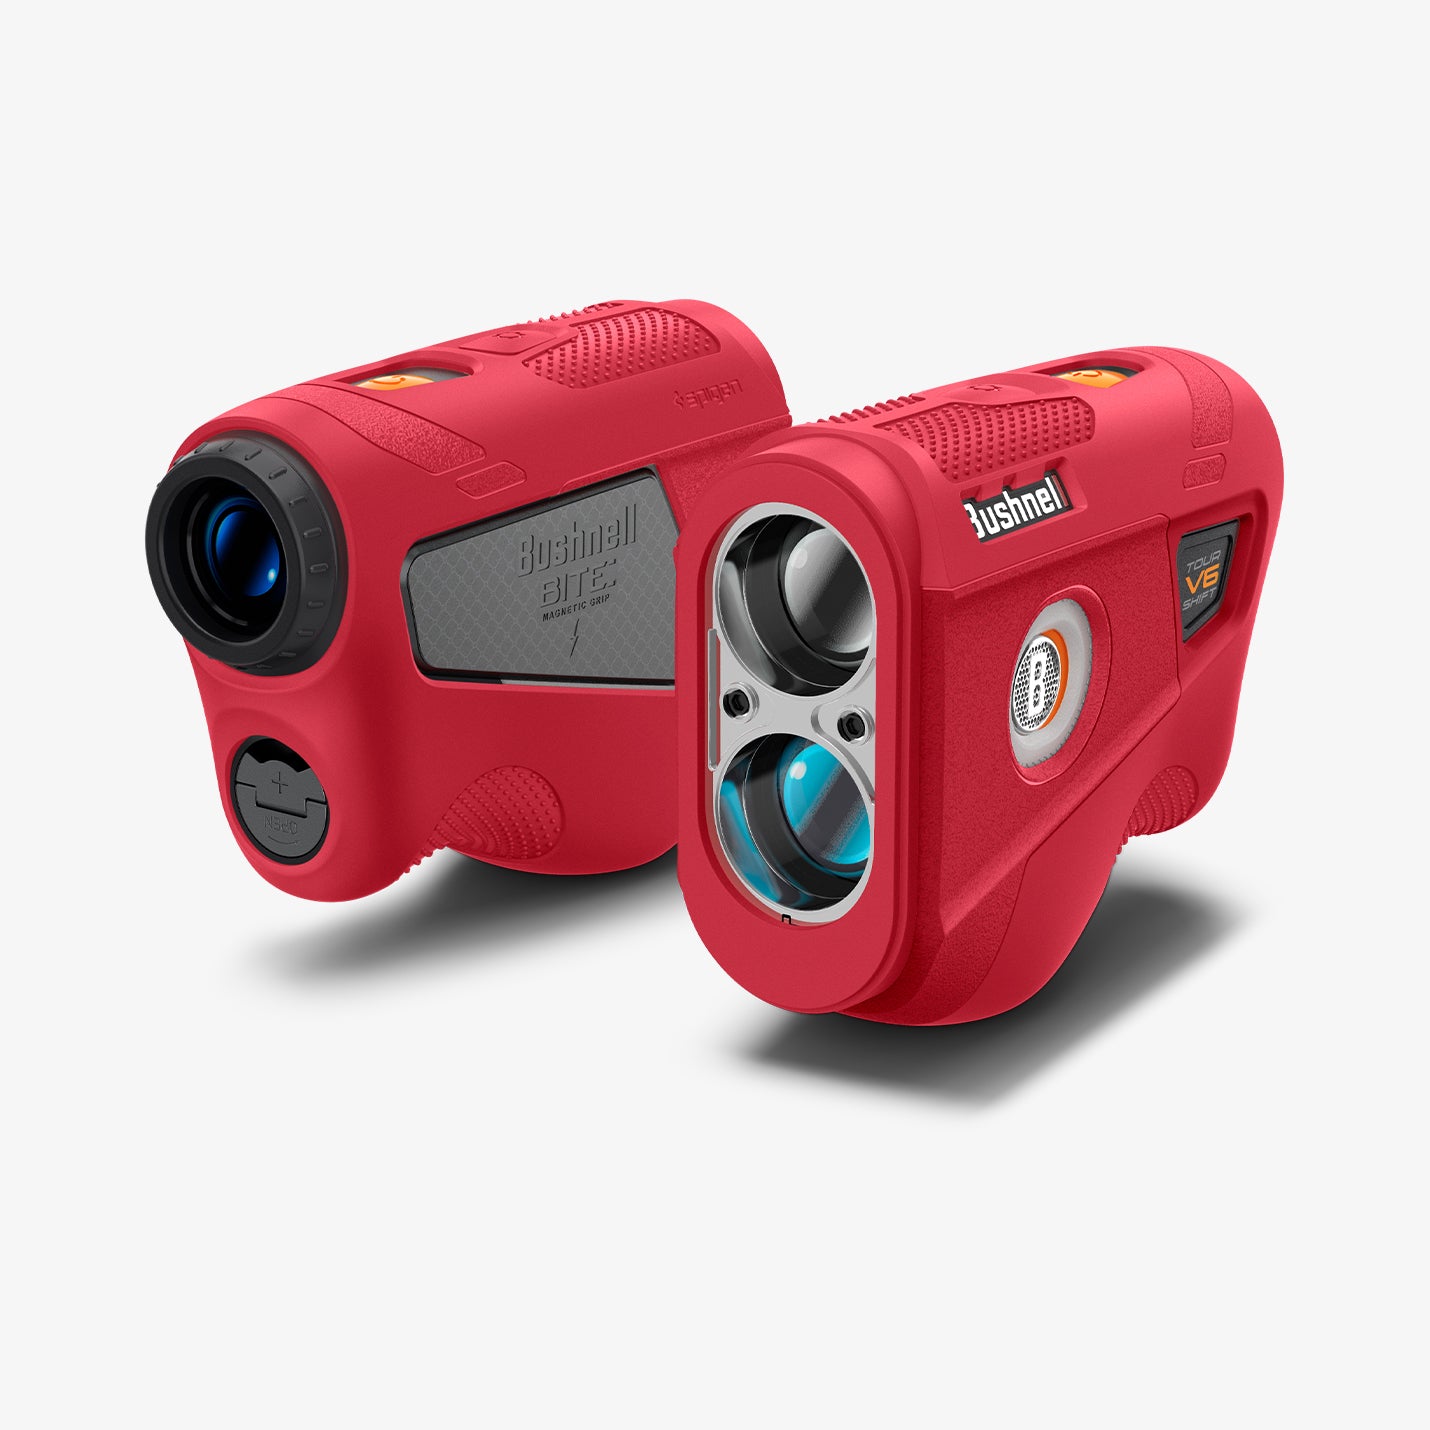 ACS07050 - Bushnell Tour V6 Shift Rangefinder Case Silicone Fit AirTag in red showing the front, side and back